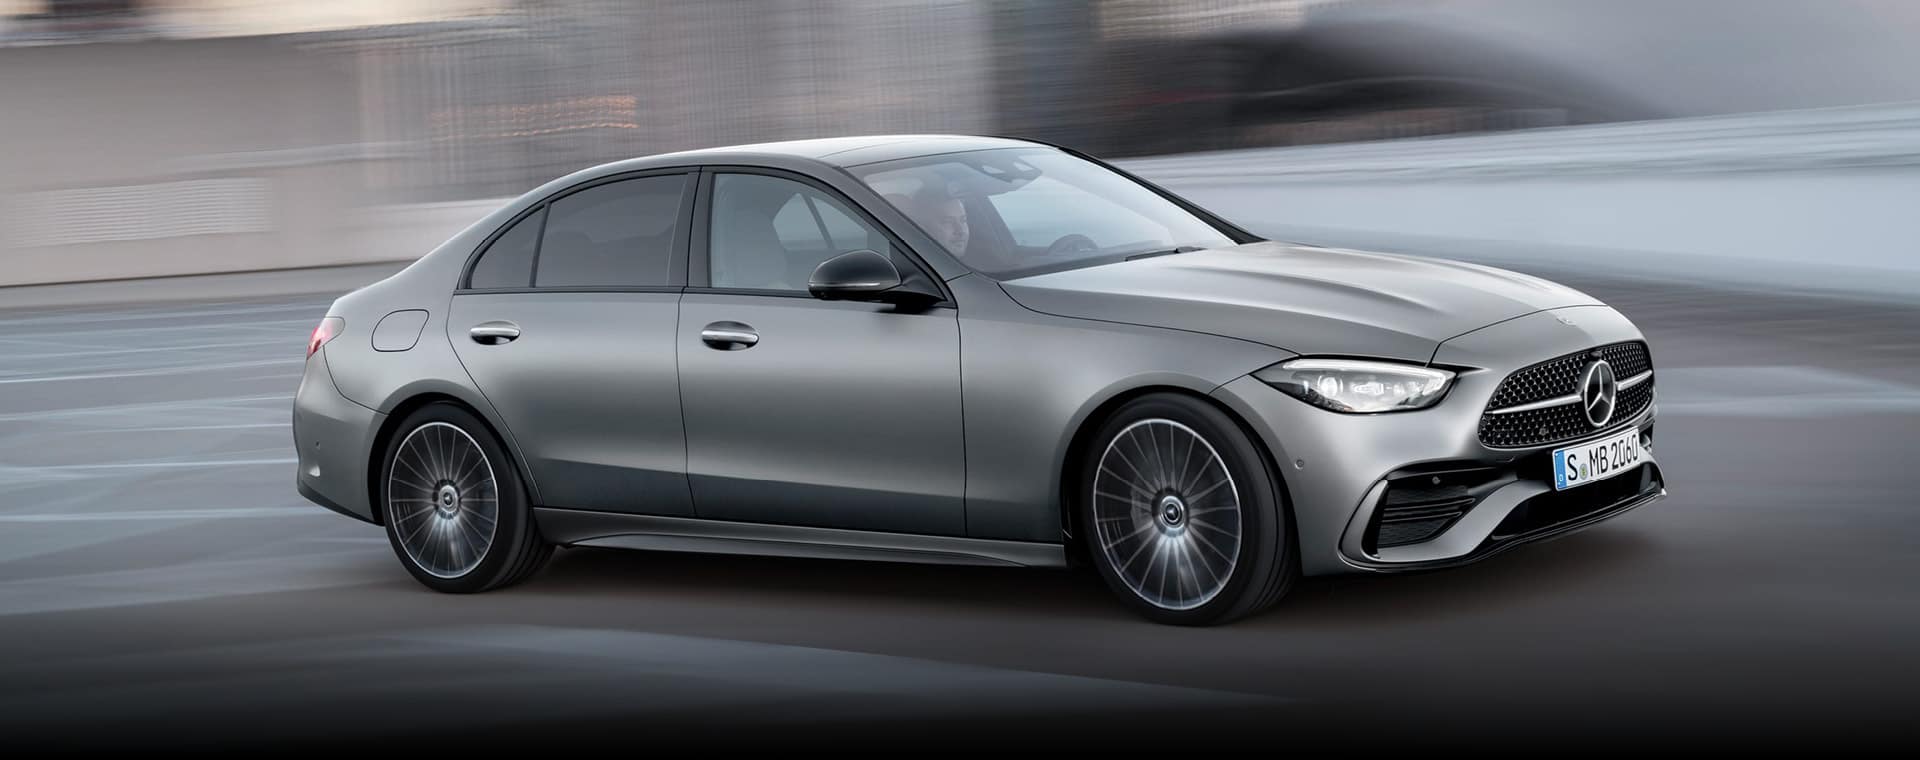 Unlike its previous iterations of the 2020 Mercedes-Benz C-class or the 2021 Mercedes Benz c class, the 2022 Mercedes-Benz C class is a luxury sedan for the masses.